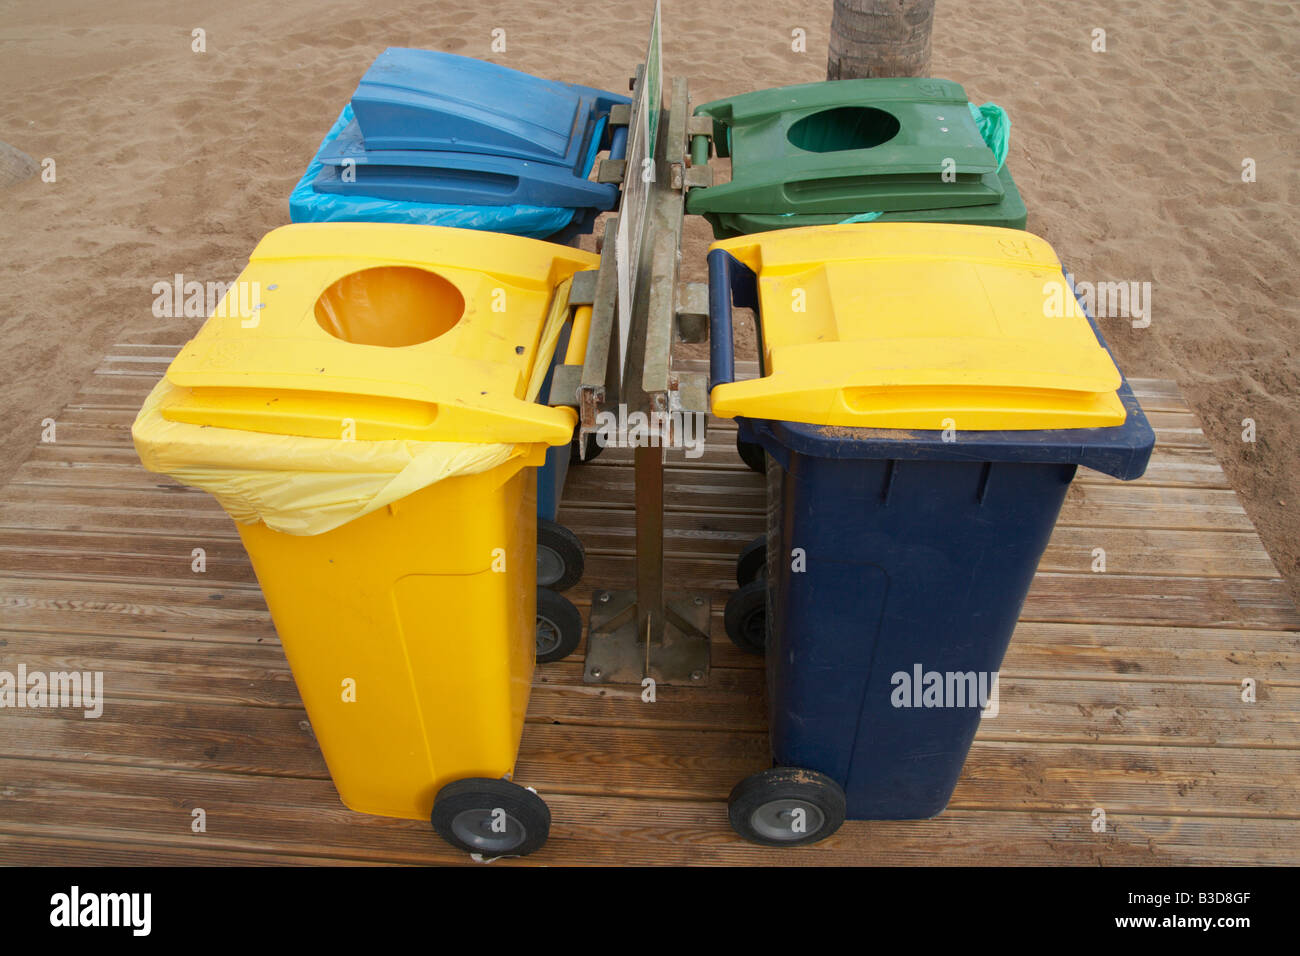 Wheelie bins for plastic, glass, paper and general rubbish on beach on Gran Canaria in The Canary islands Stock Photo